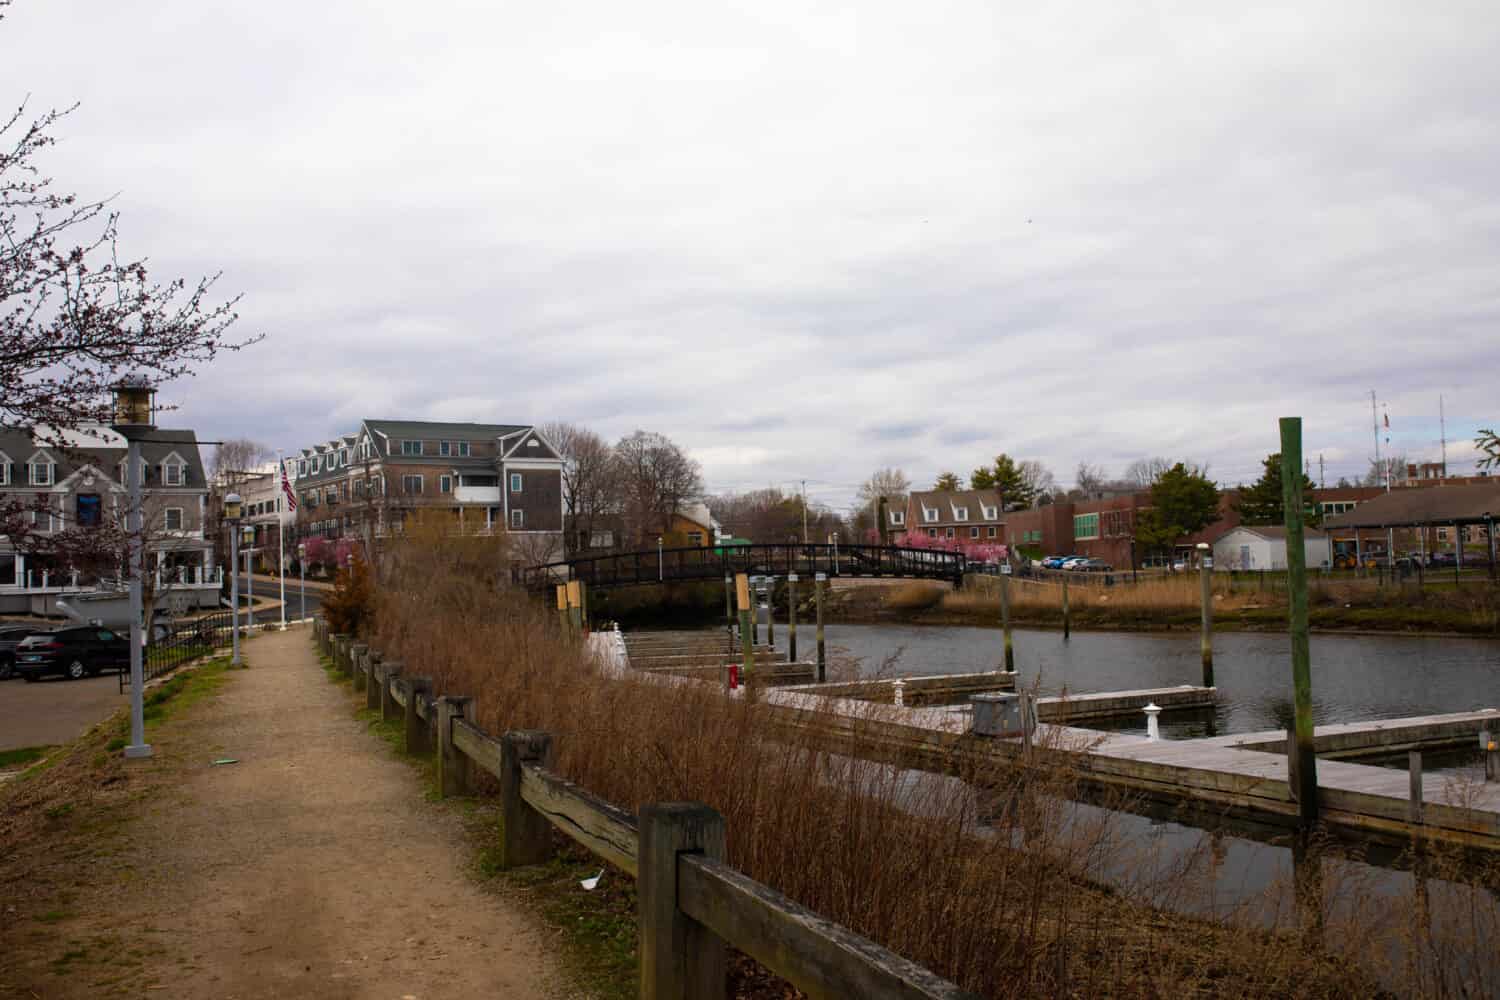 Small town landscape - Milford marina on the right, walking path on the left,  colorful townhouses, and walking bridge in the back on a grey gloomy day in Milford, CT. 